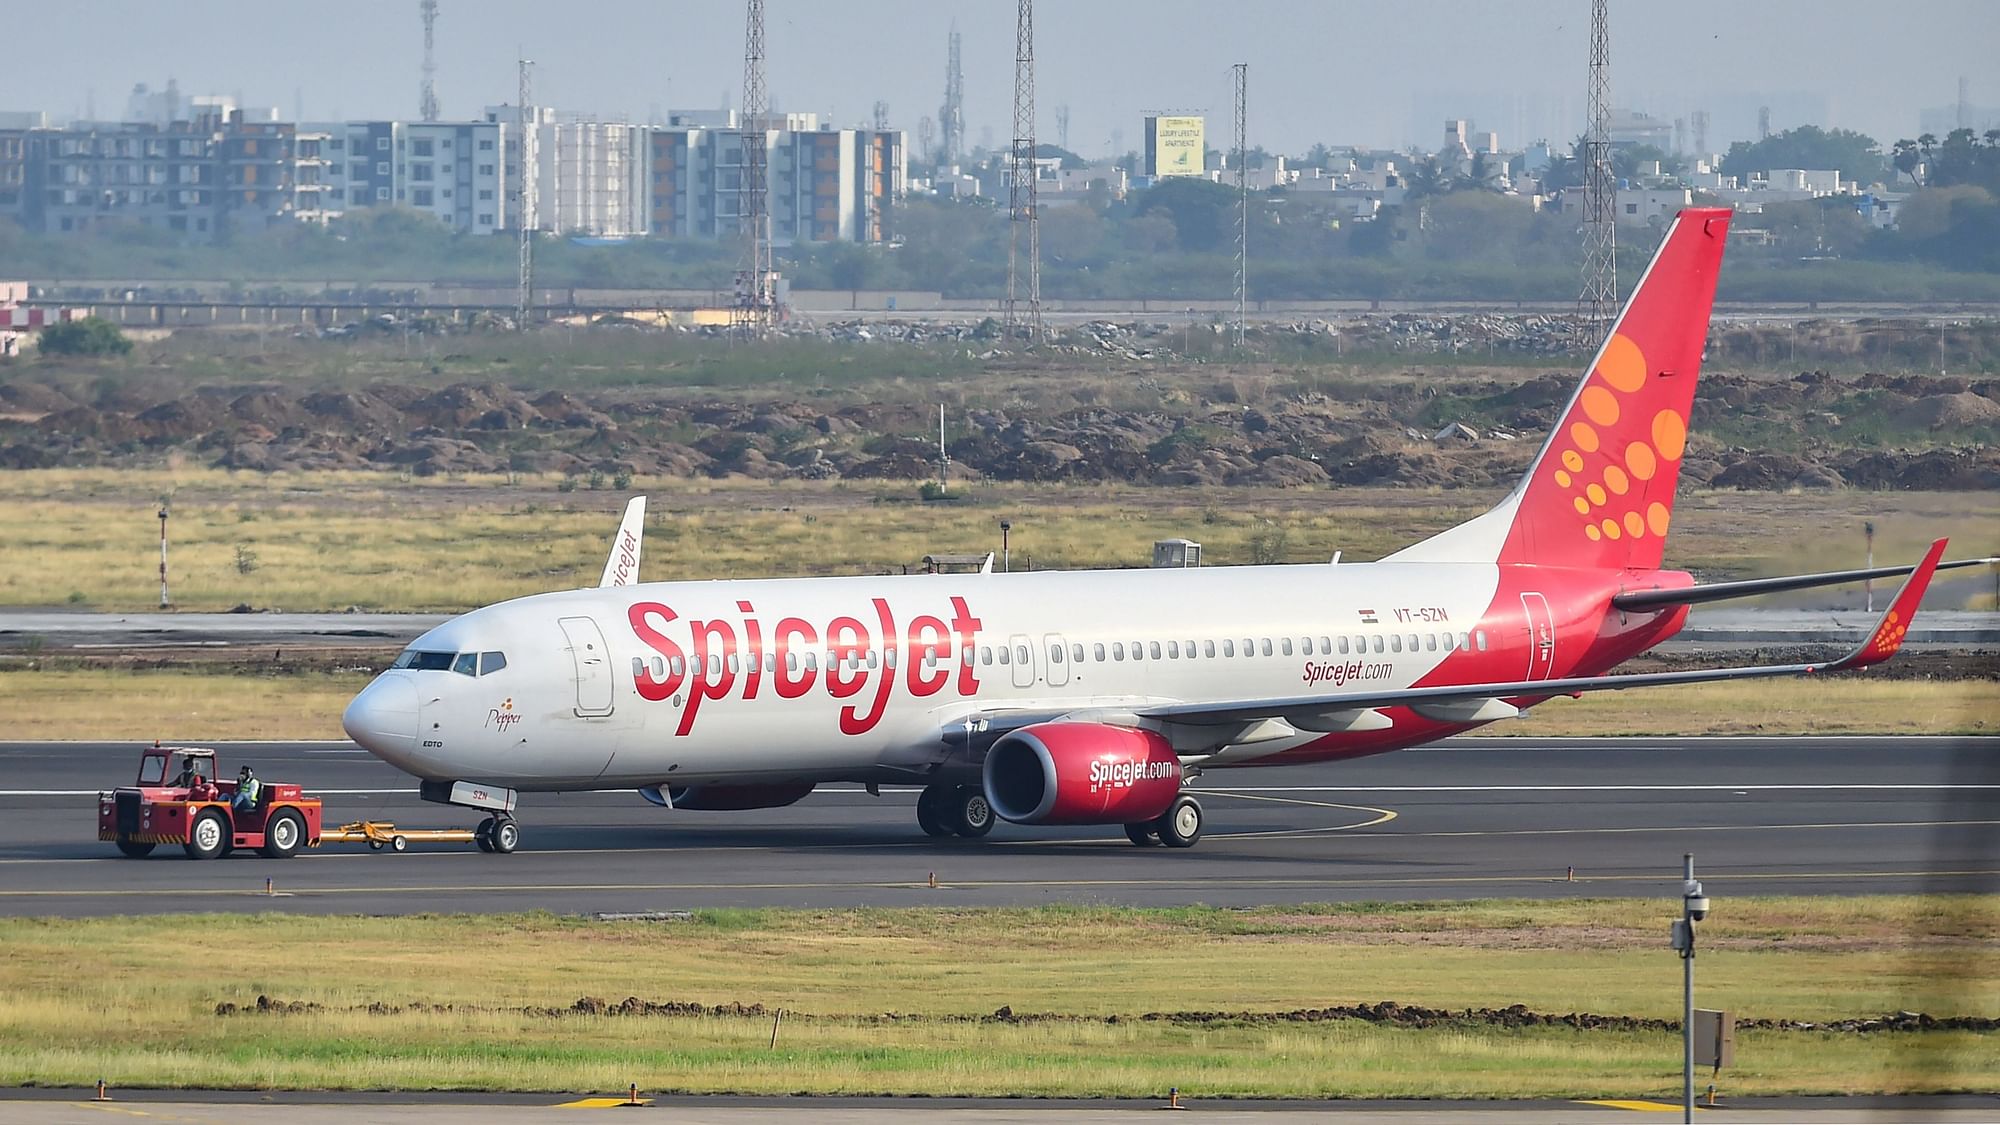 <div class="paragraphs"><p>After a slew of mishaps involving&nbsp;<a href="https://www.thequint.com/topic/spicejet-flight">SpiceJet </a>flights over the past few weeks, the <a href="https://www.thequint.com/news/india/dgca-issues-show-cause-notice-to-spicejet-over-degradation-of-safety-margins-of-aircrafts">Directorate General of Civil Aviation</a> (DGCA) on Monday, 11 July, found another aberration in one of its aircraft after it landed in Dubai.</p></div>